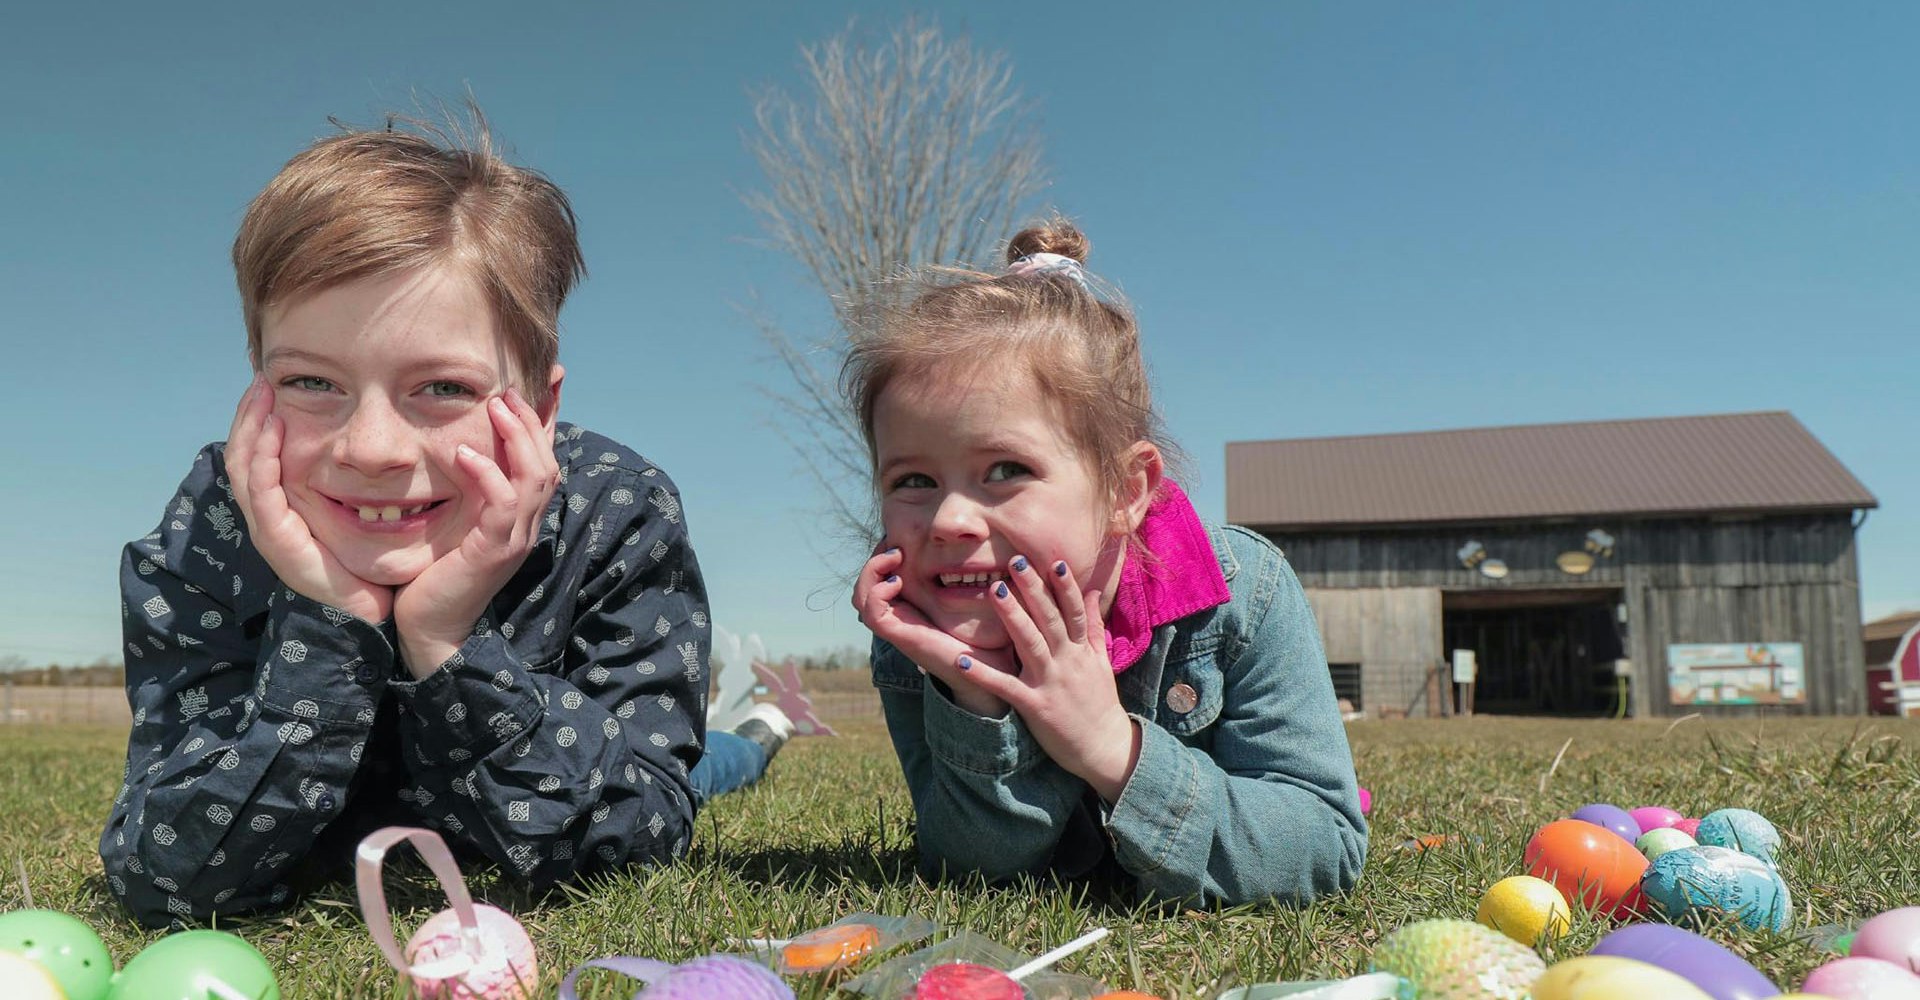 Kids and Easter Eggs